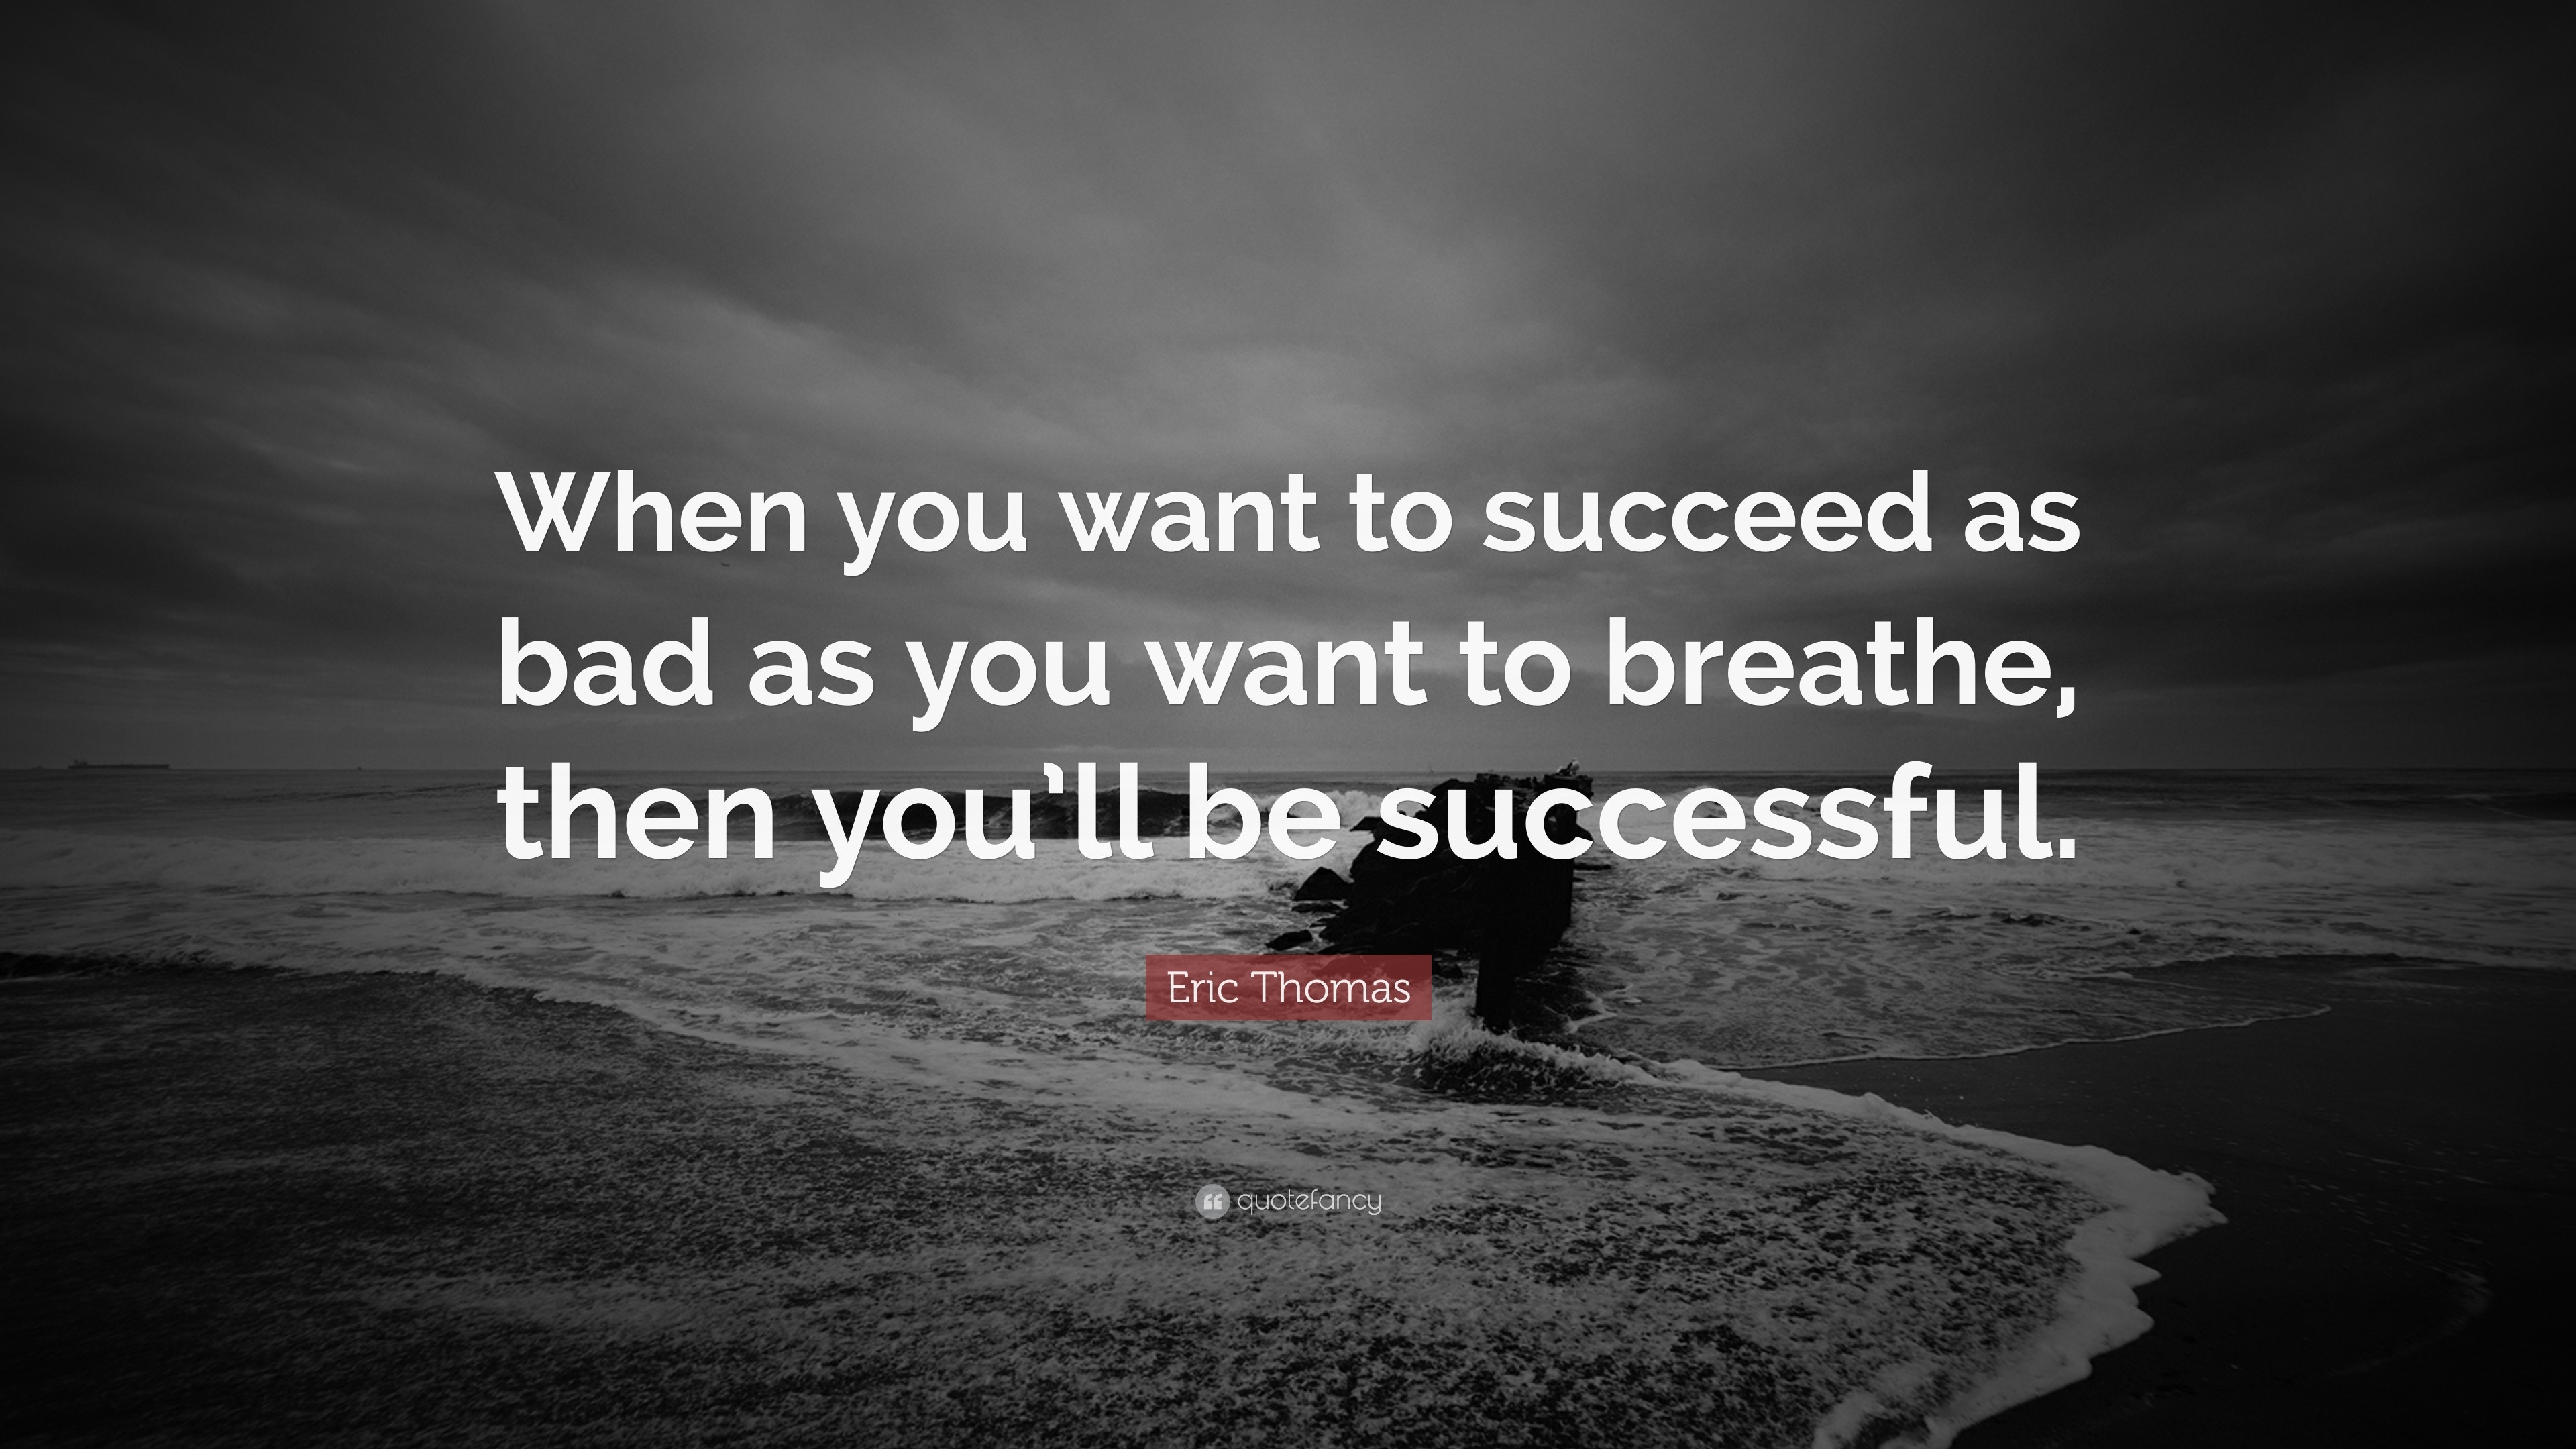 Eric Thomas Quote: “When you want to succeed as bad as you 